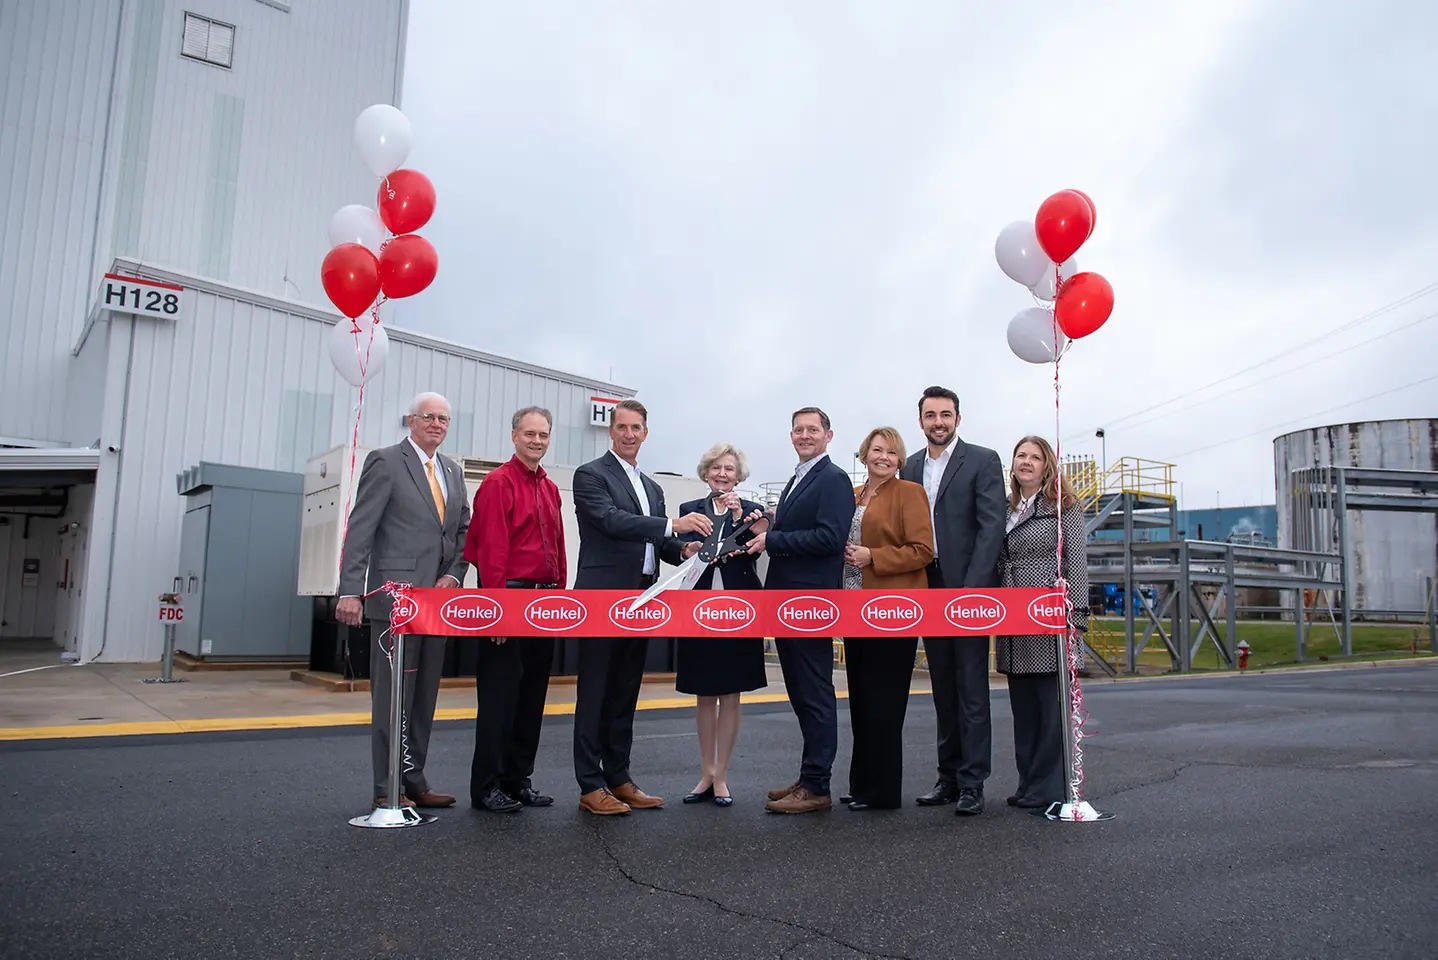 
Henkel leaders and local dignitaries celebrate the completion of the new state-of-the-art production area at the Salisbury facility during a ribbon cutting ceremony in Salisbury, North Carolina.